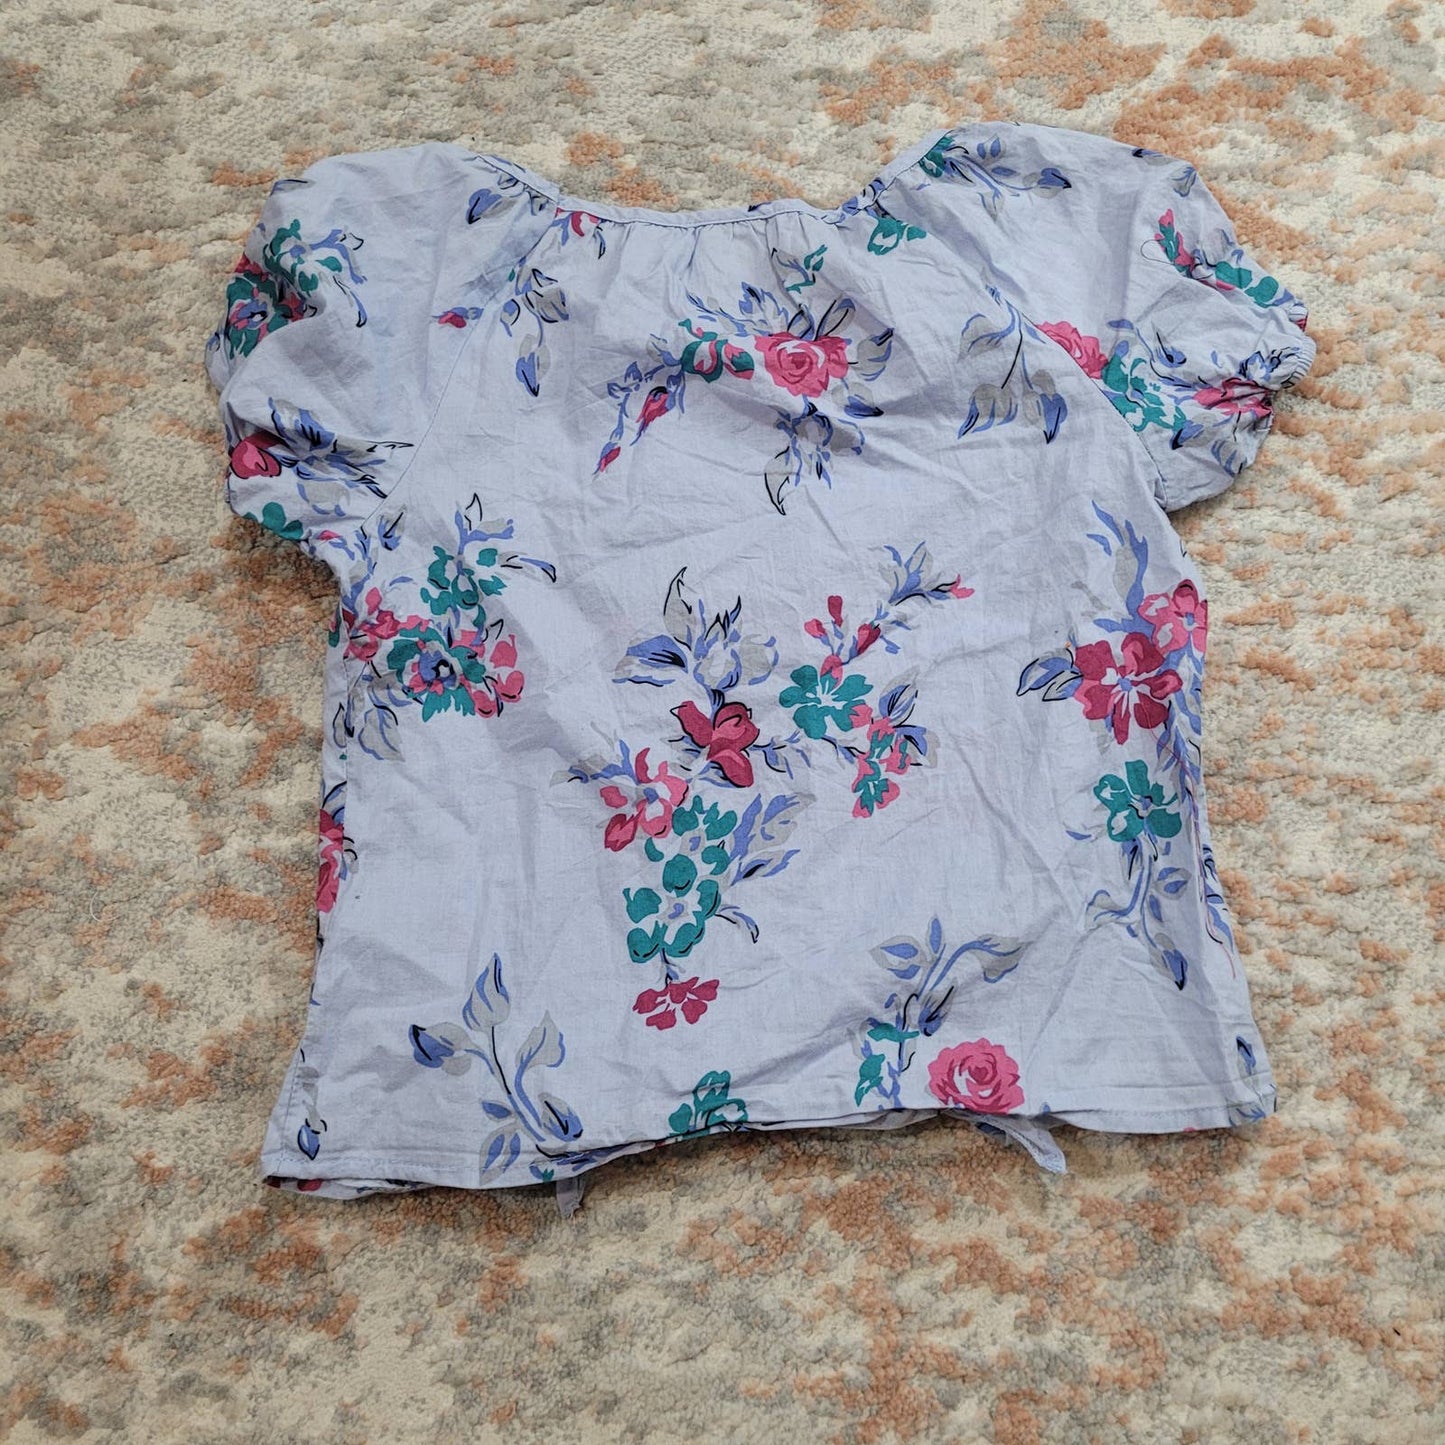 Mudd Blue Floral Short Sleeve Blouse - Size Small